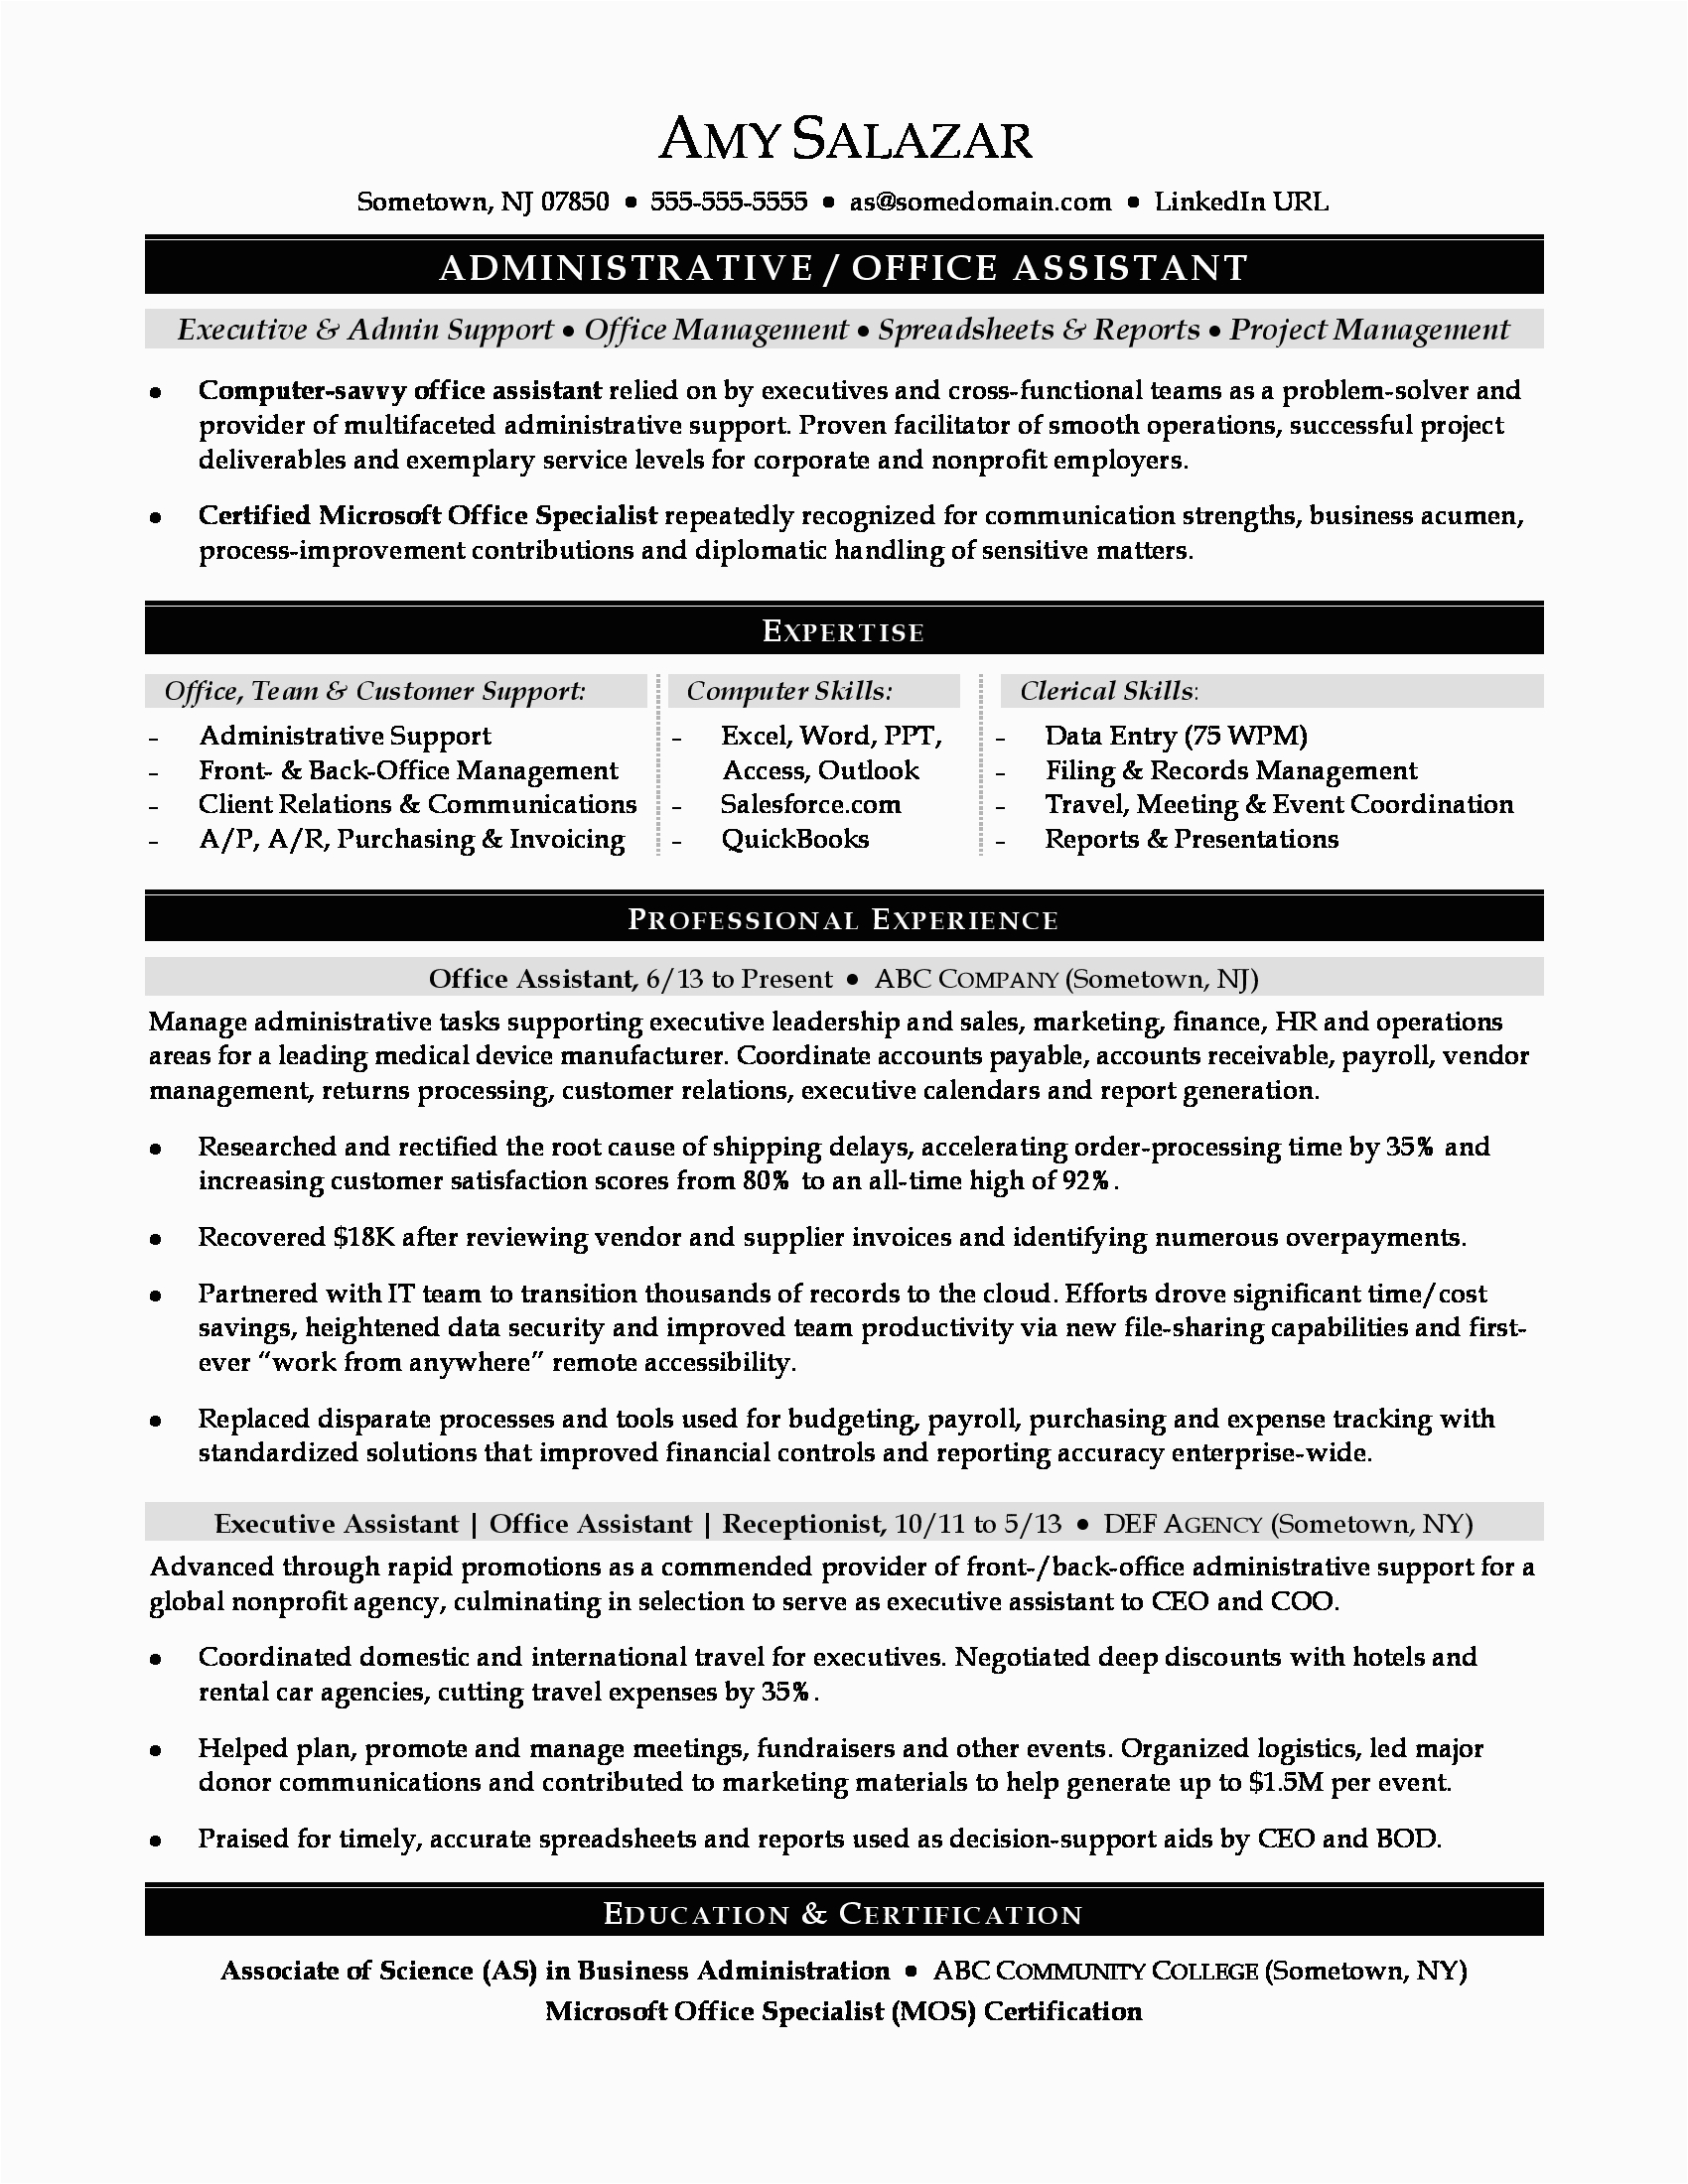 Sample Resume for Administrative assistant Office Manager Fice assistant Resume Sample Resumes for Administrative